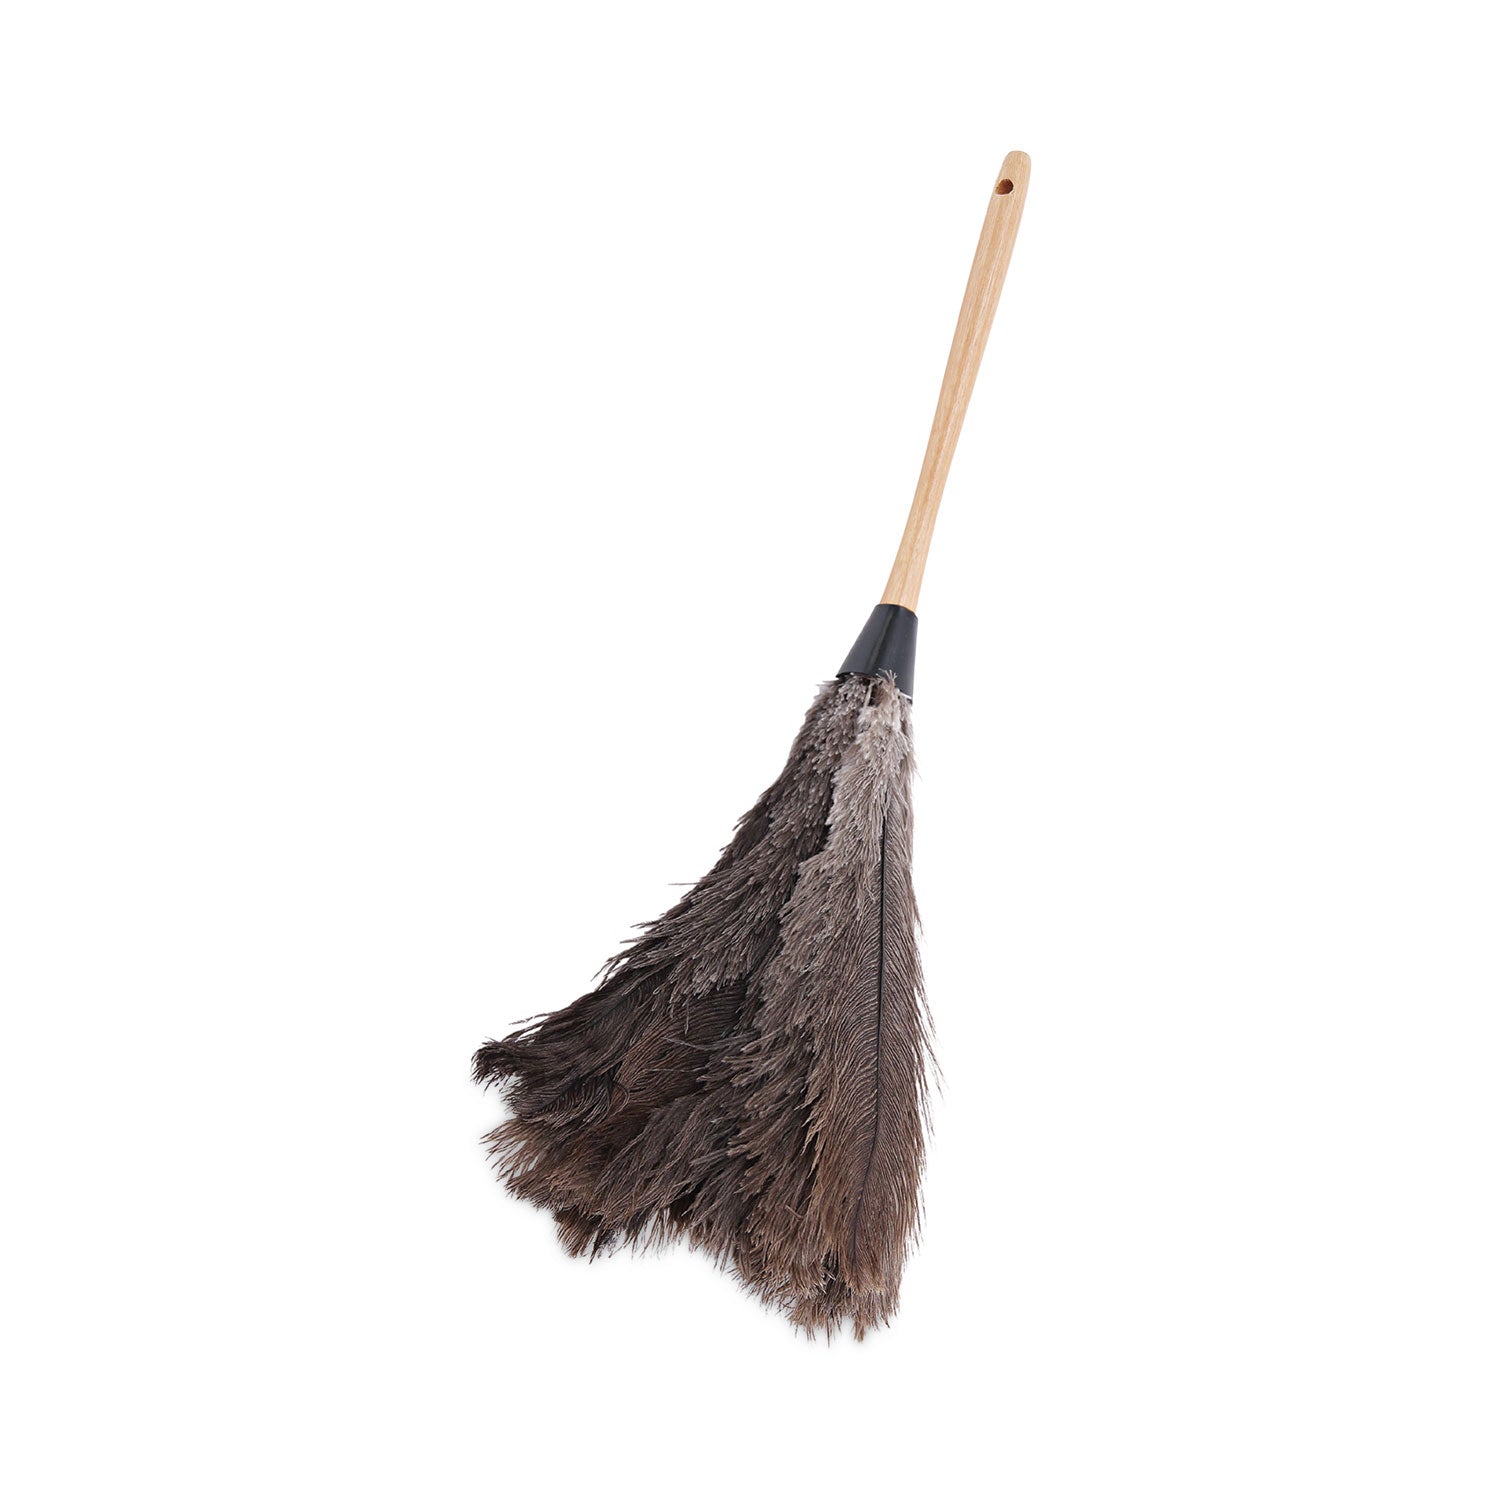 professional-ostrich-feather-duster-wood-handle-20_bwk20gy - 1